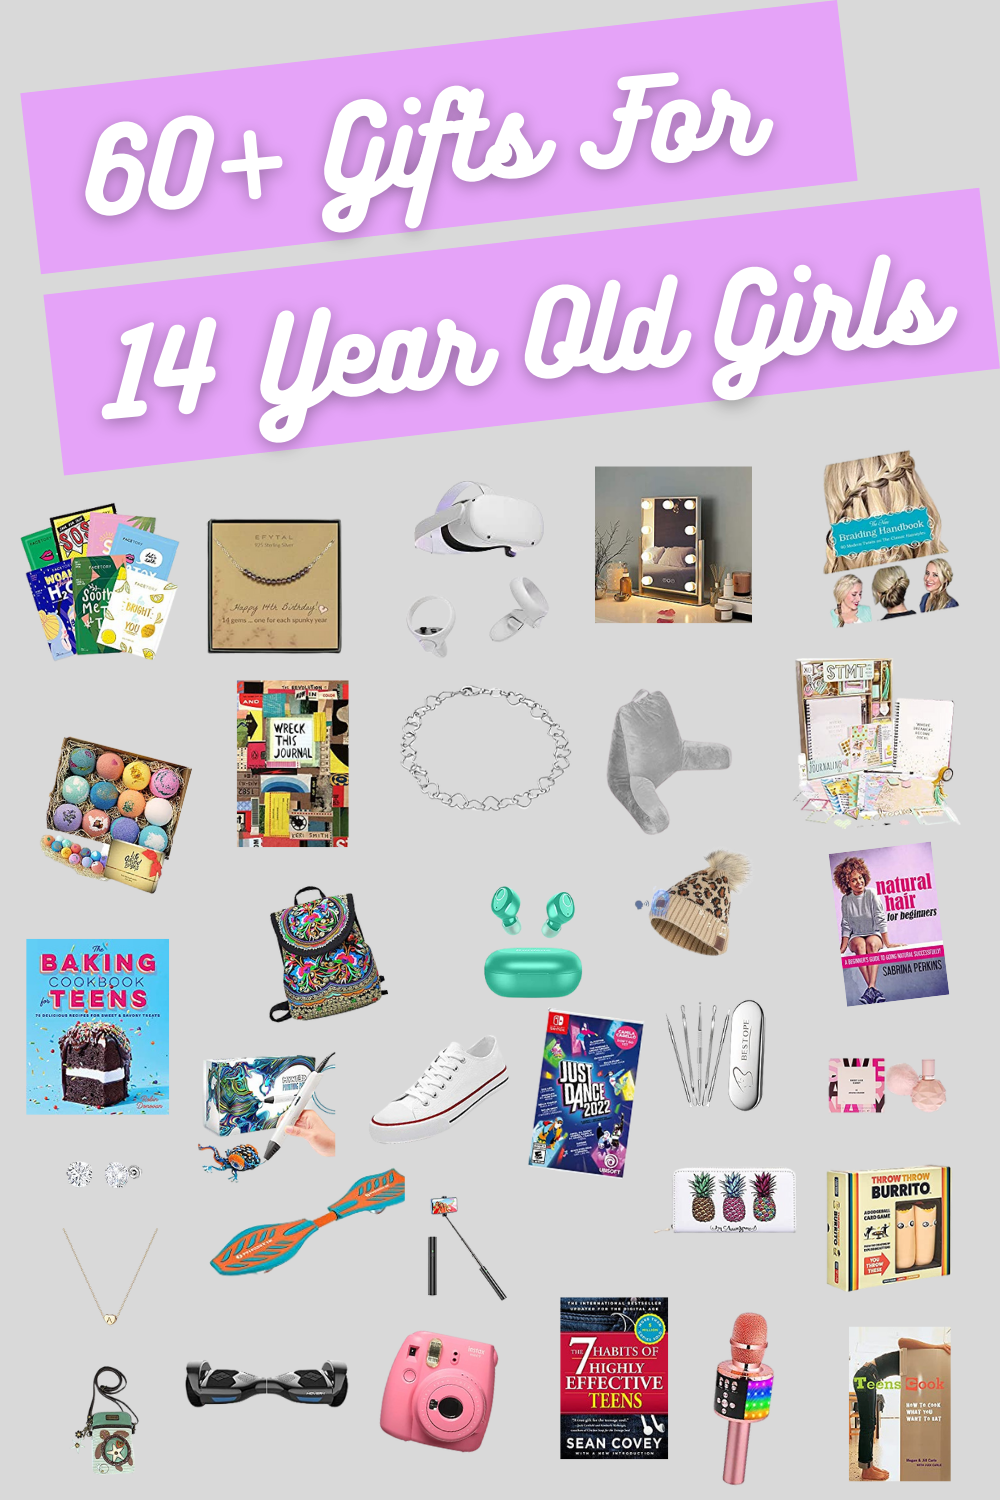 Cute Gifts Ideas for 14 Year Old Girls